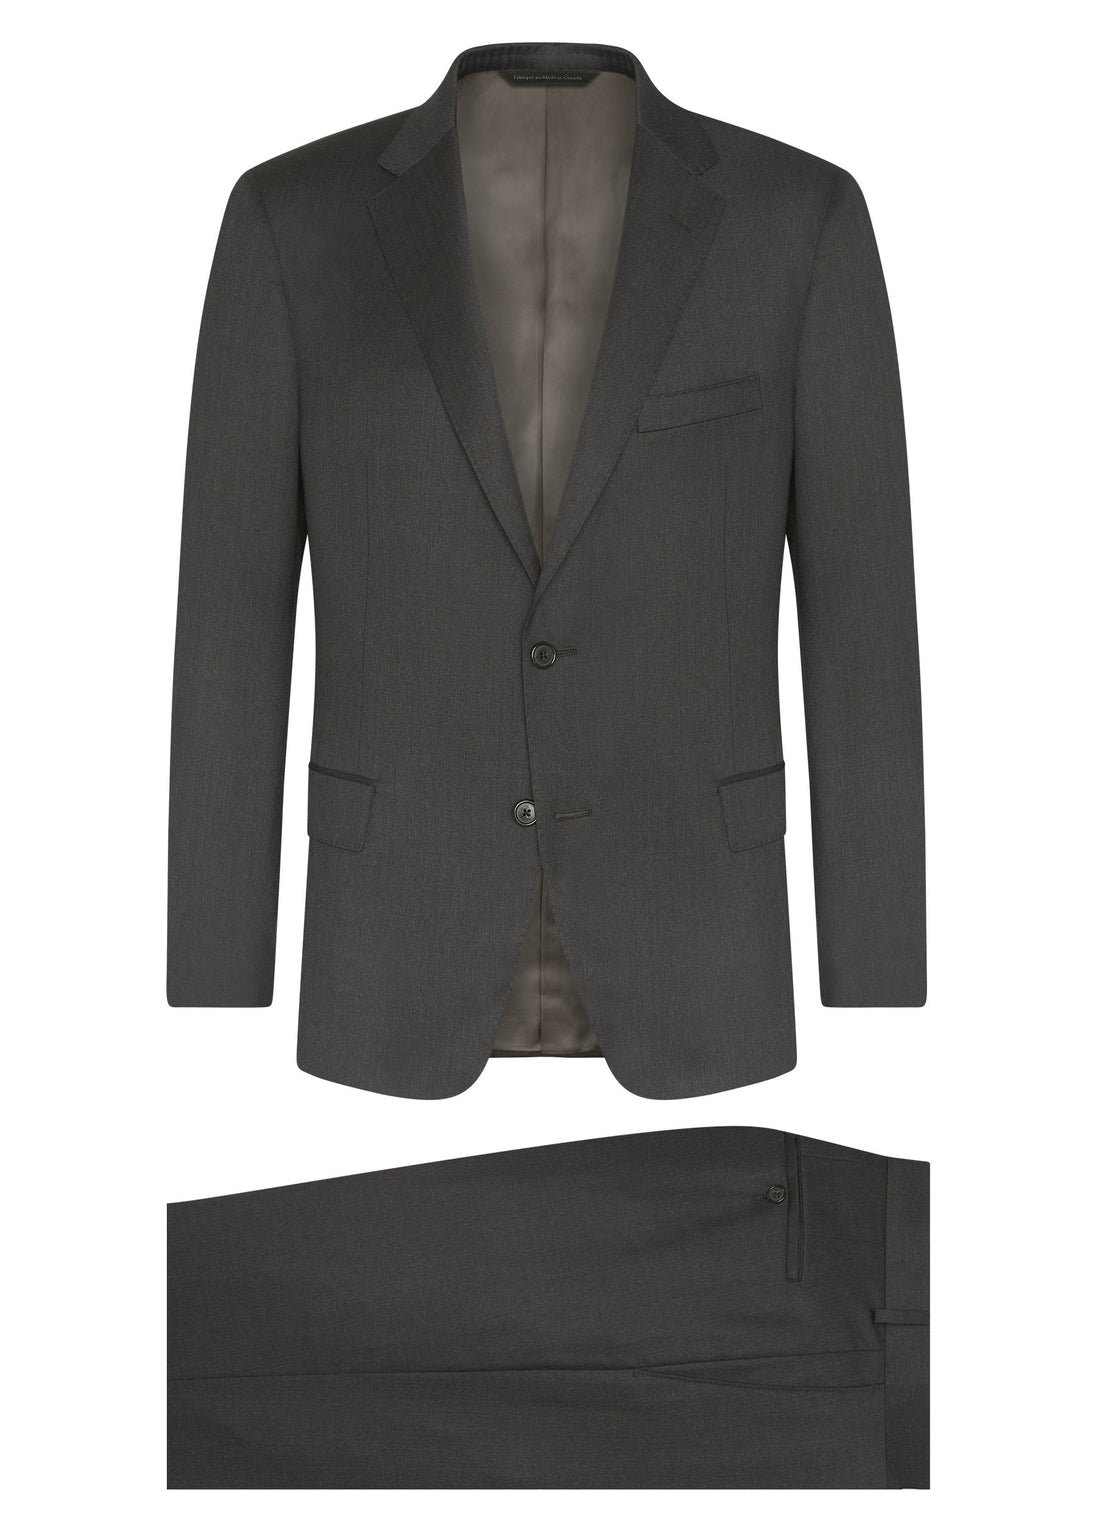 Canadian made Grey Super 120s Wool Suit from Samuelsohn